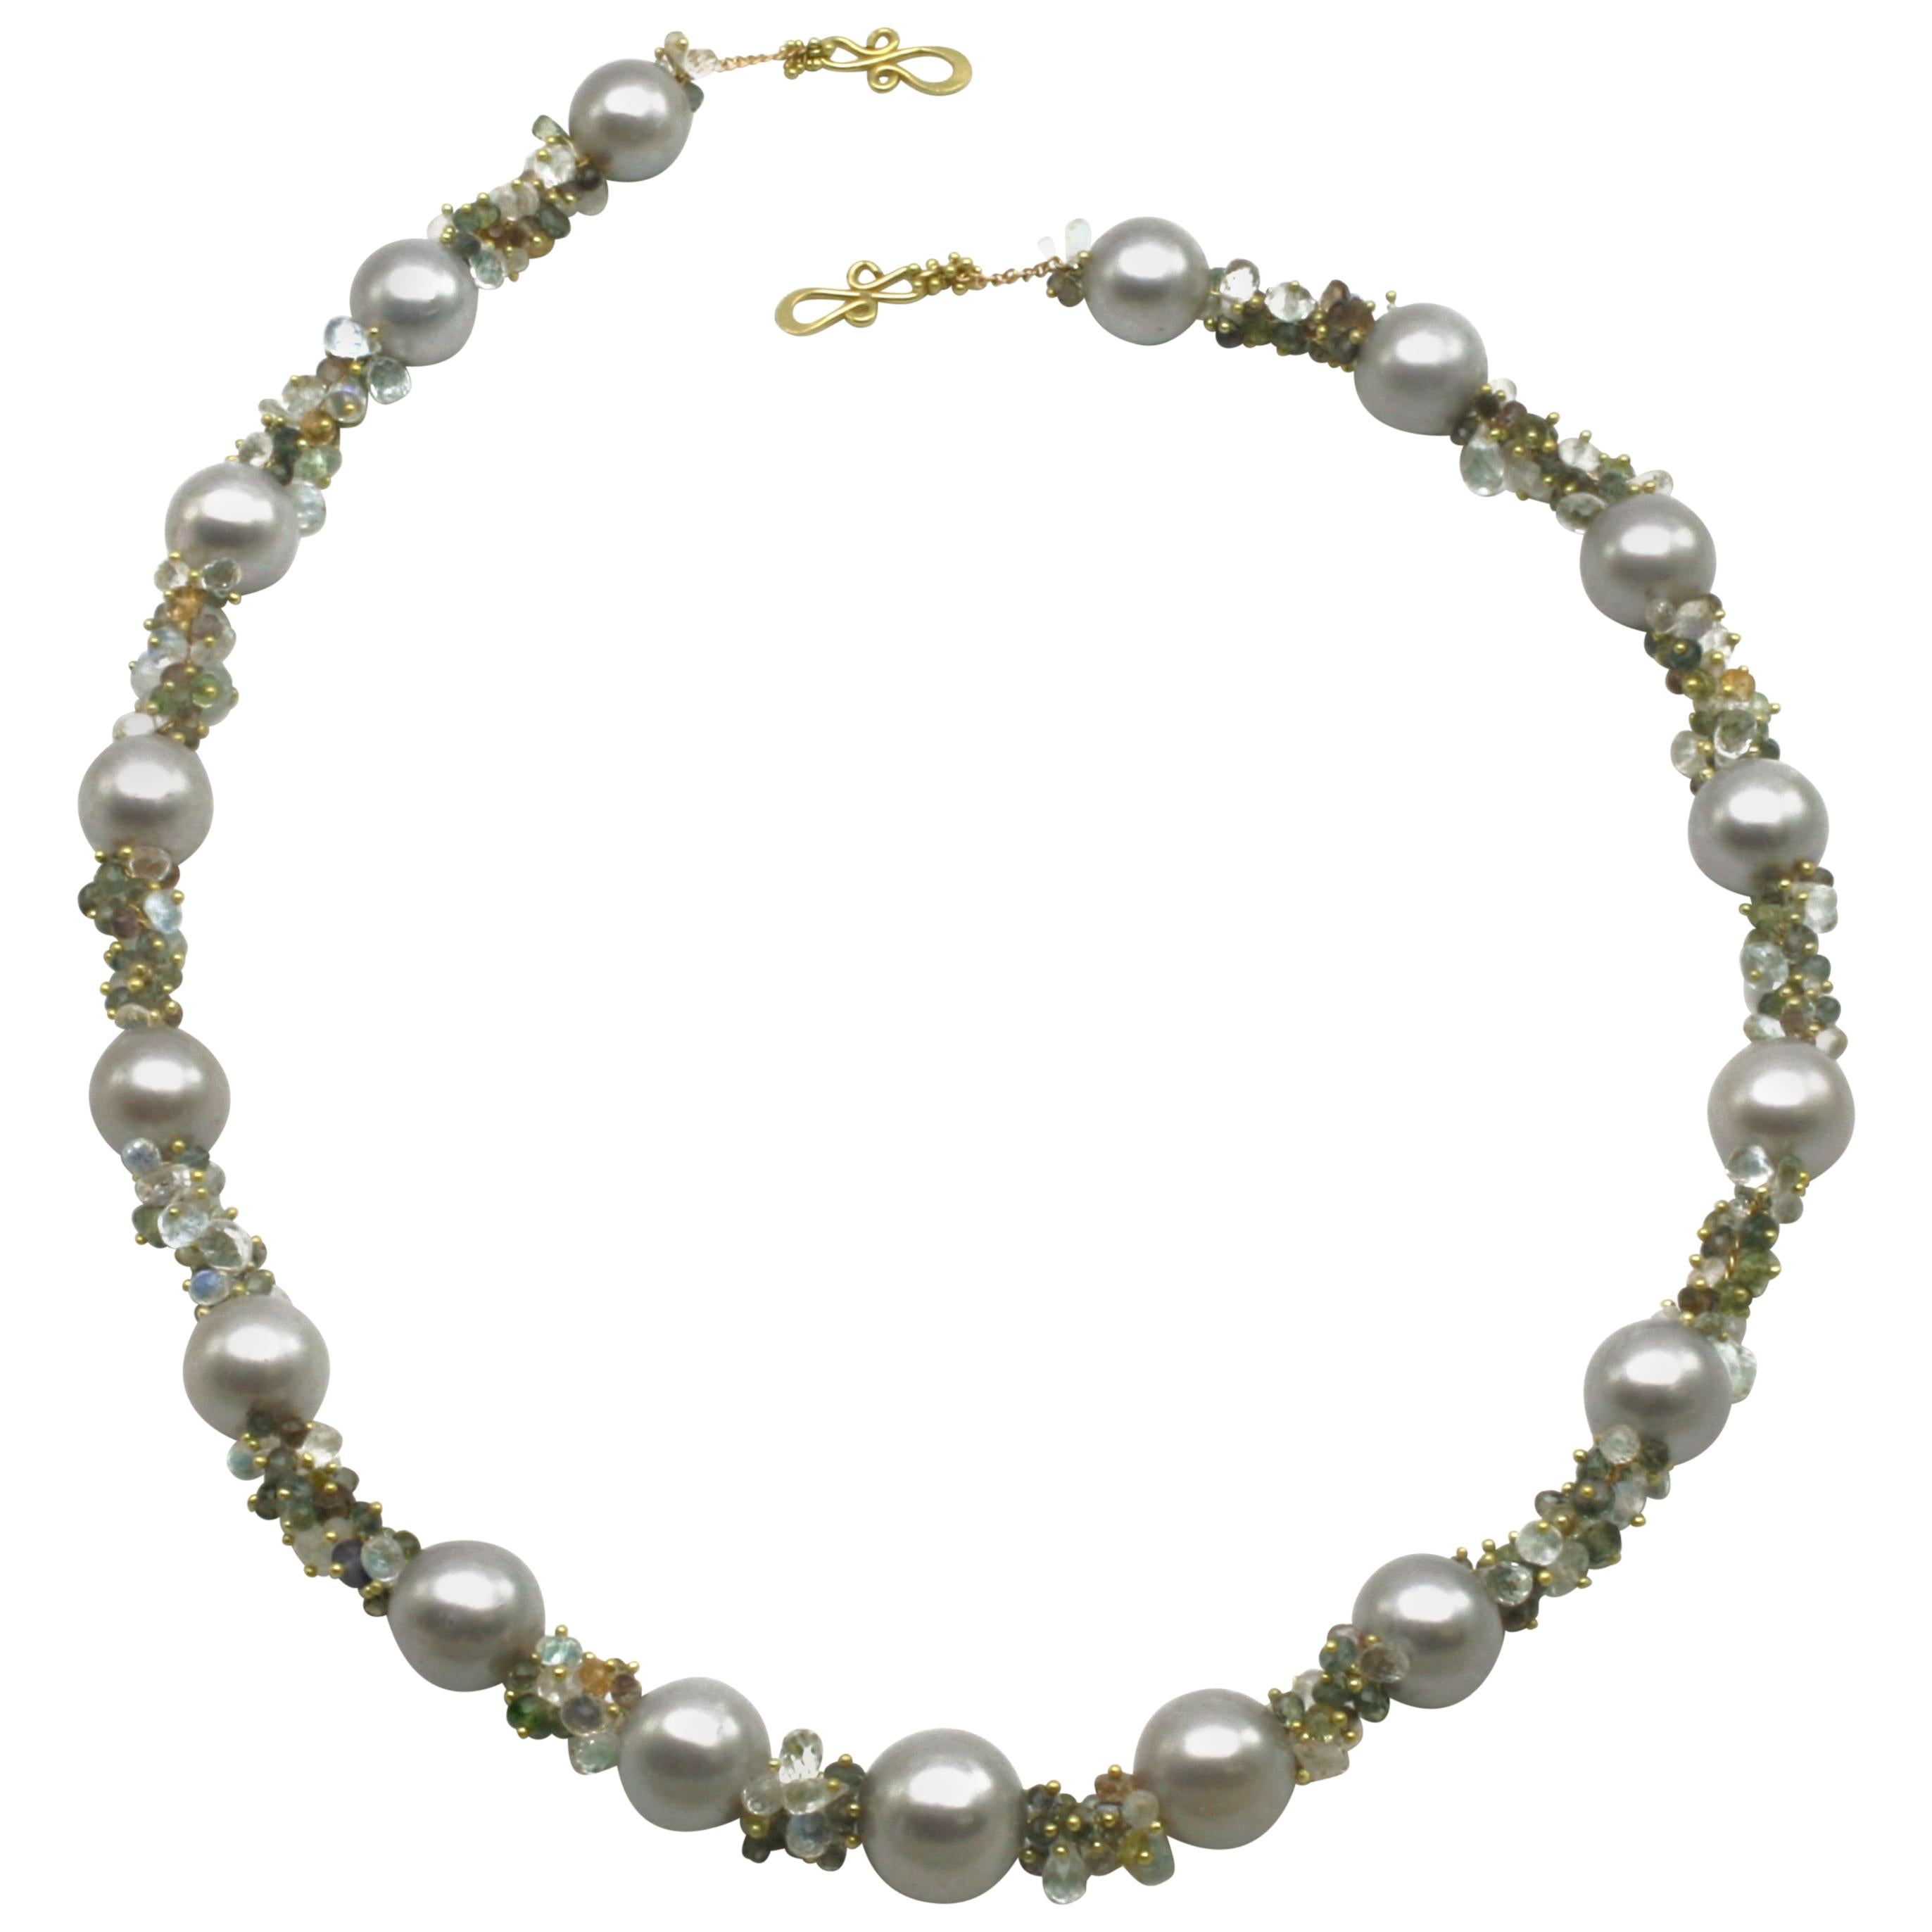 Pearl Necklace with Grey Pearls, Faceted Gemstone Beads in 18k Diana Kim England For Sale